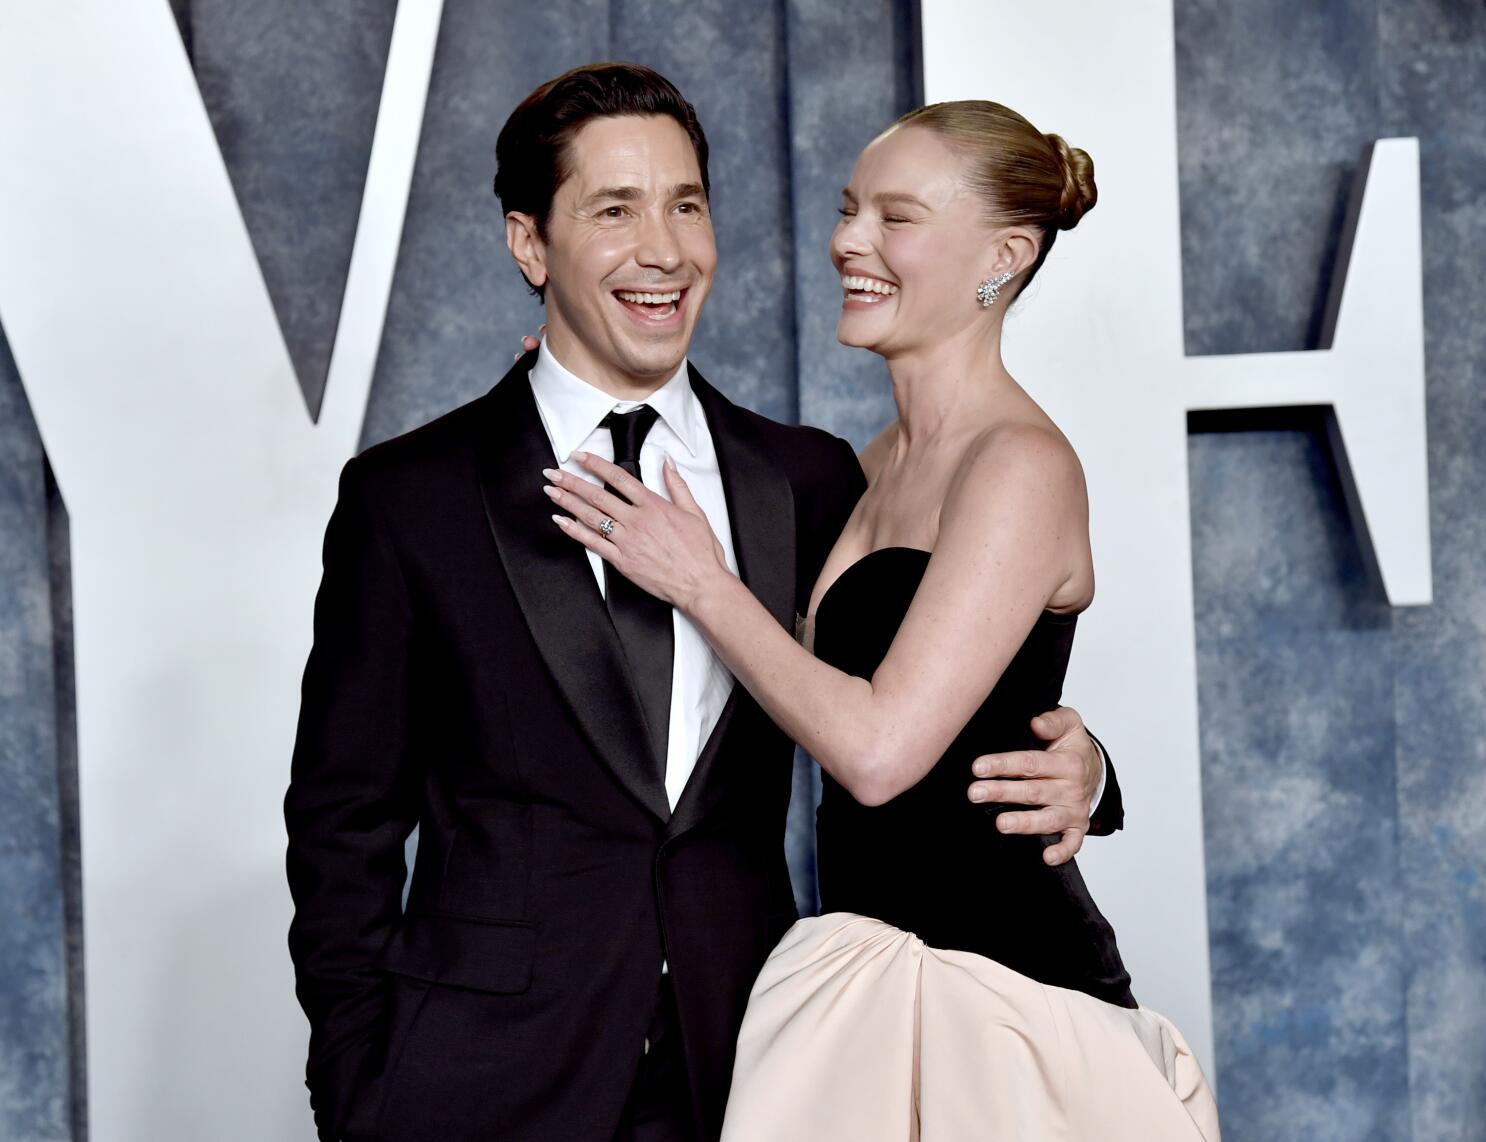 Kate Bosworth Is a 'Heart Breaker' With Hubby Michael Polish